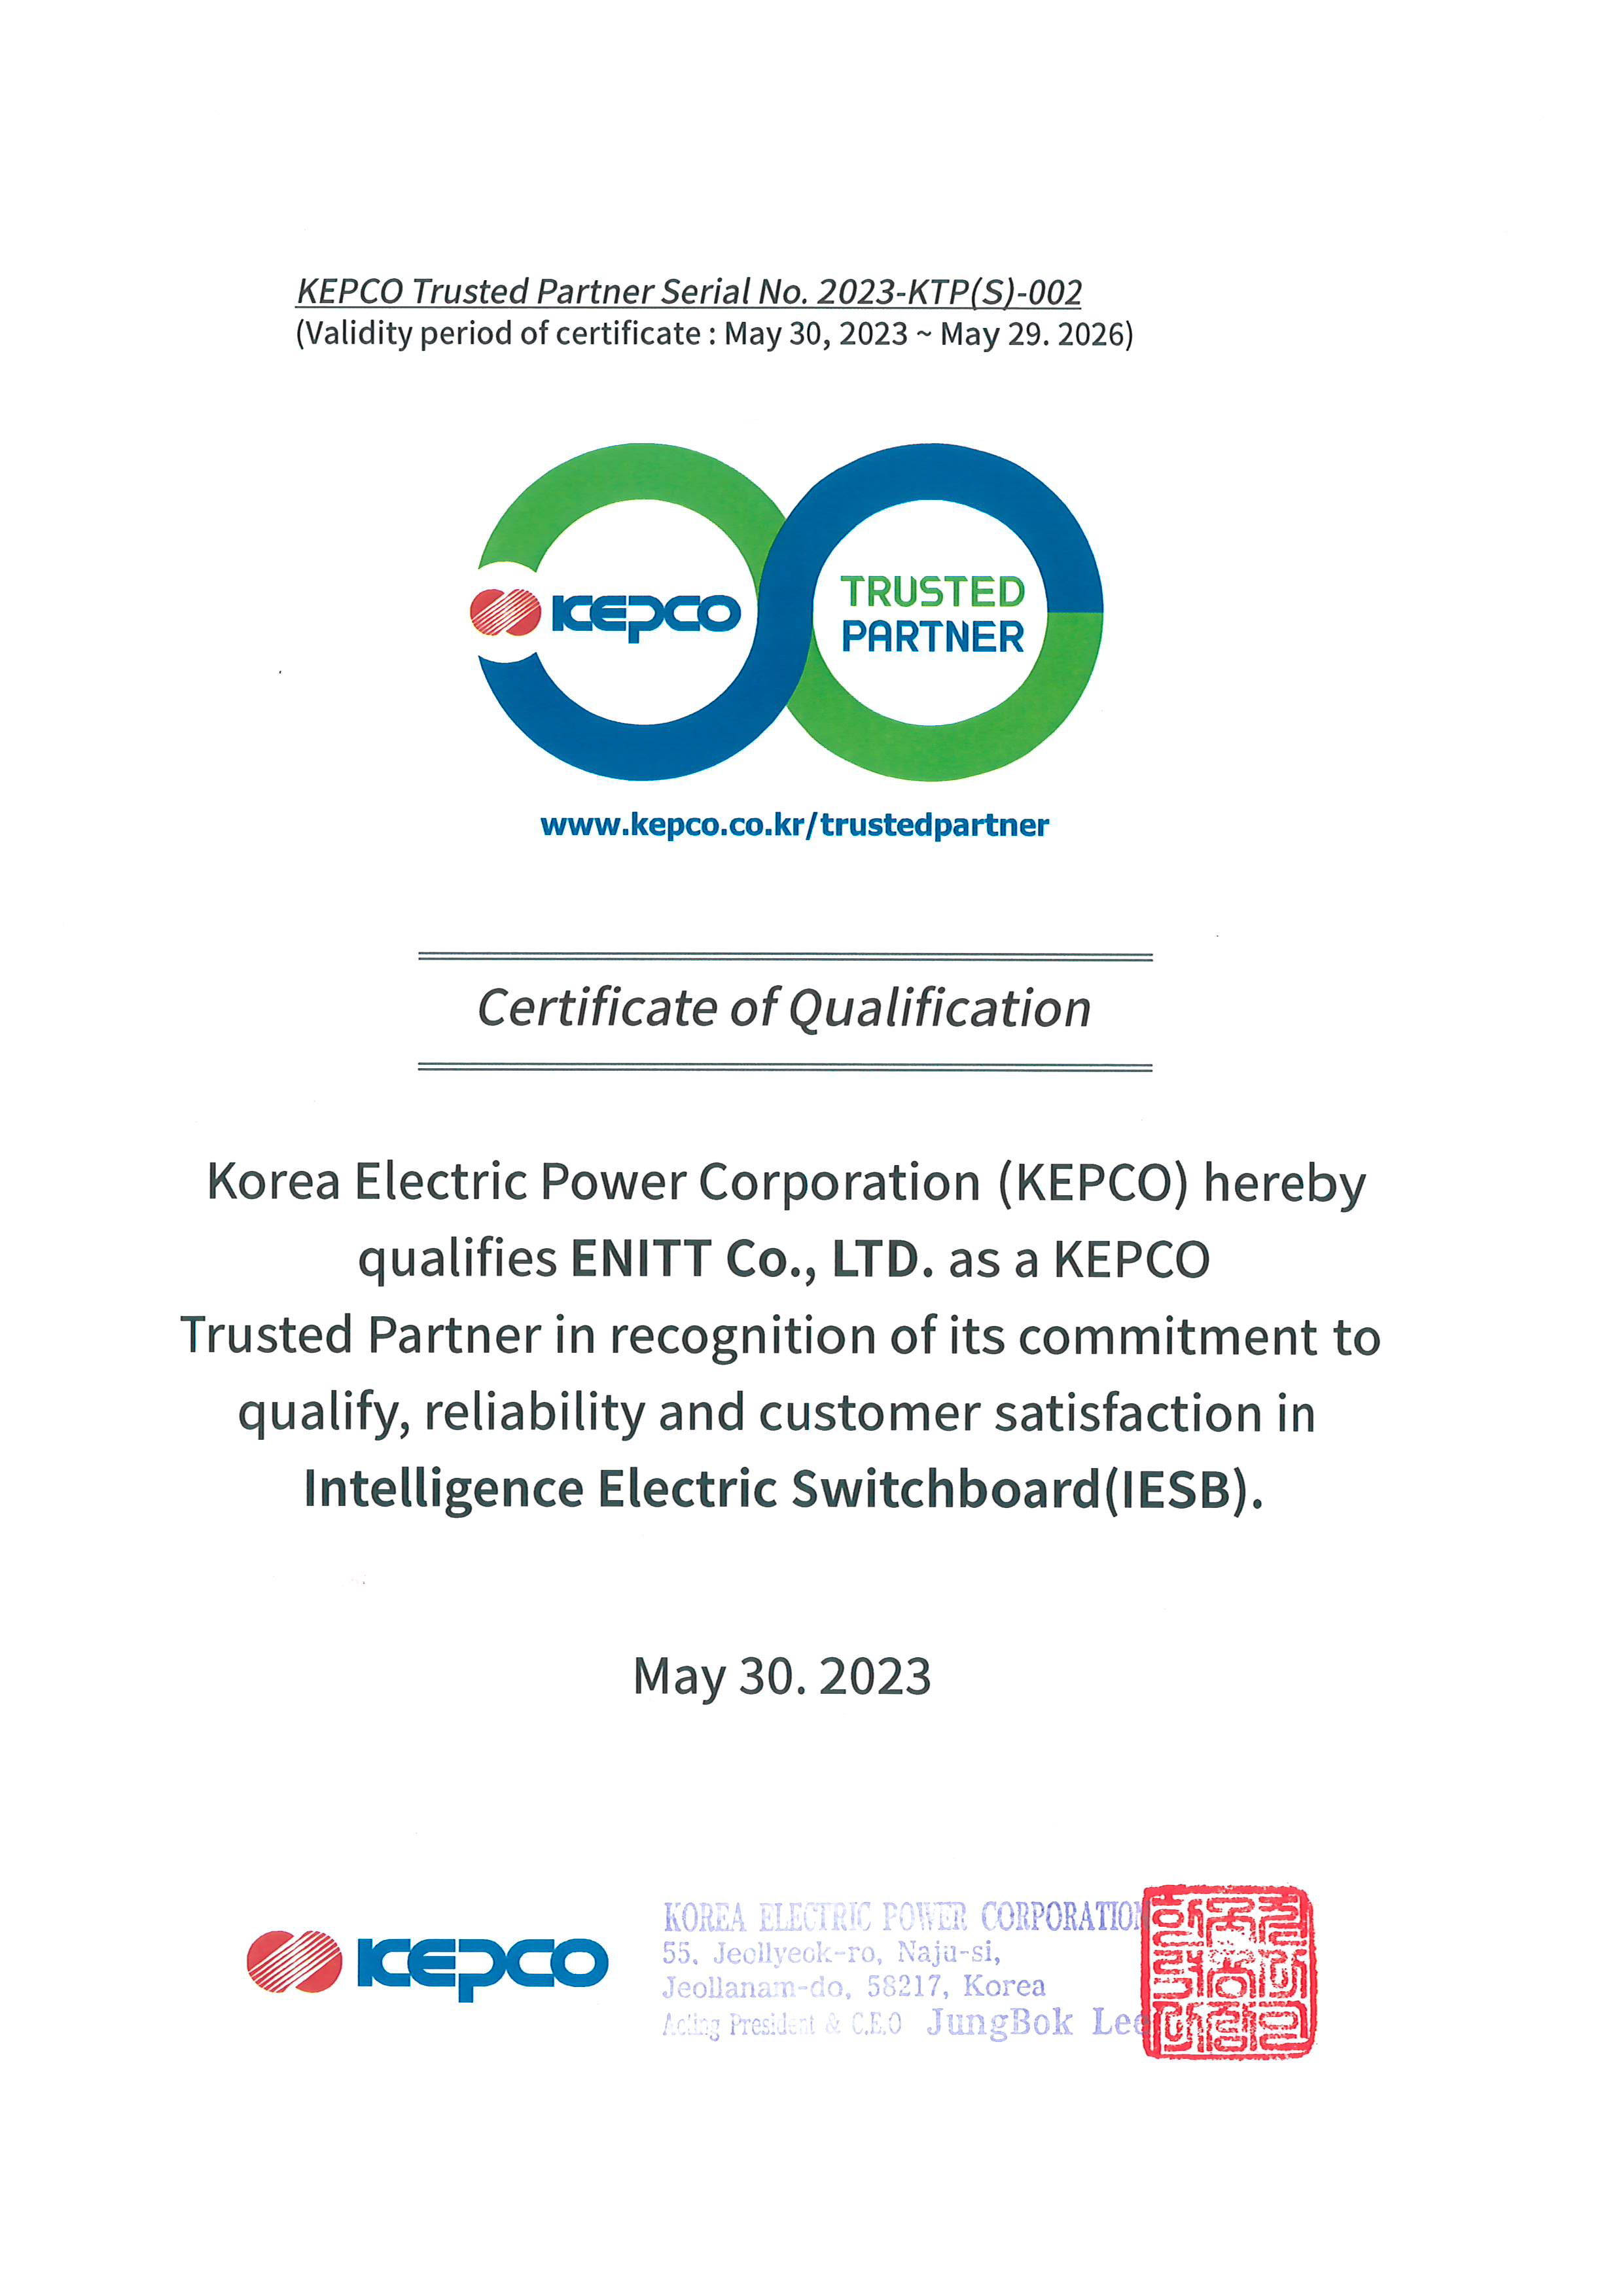 KEPCO Trusted Partner